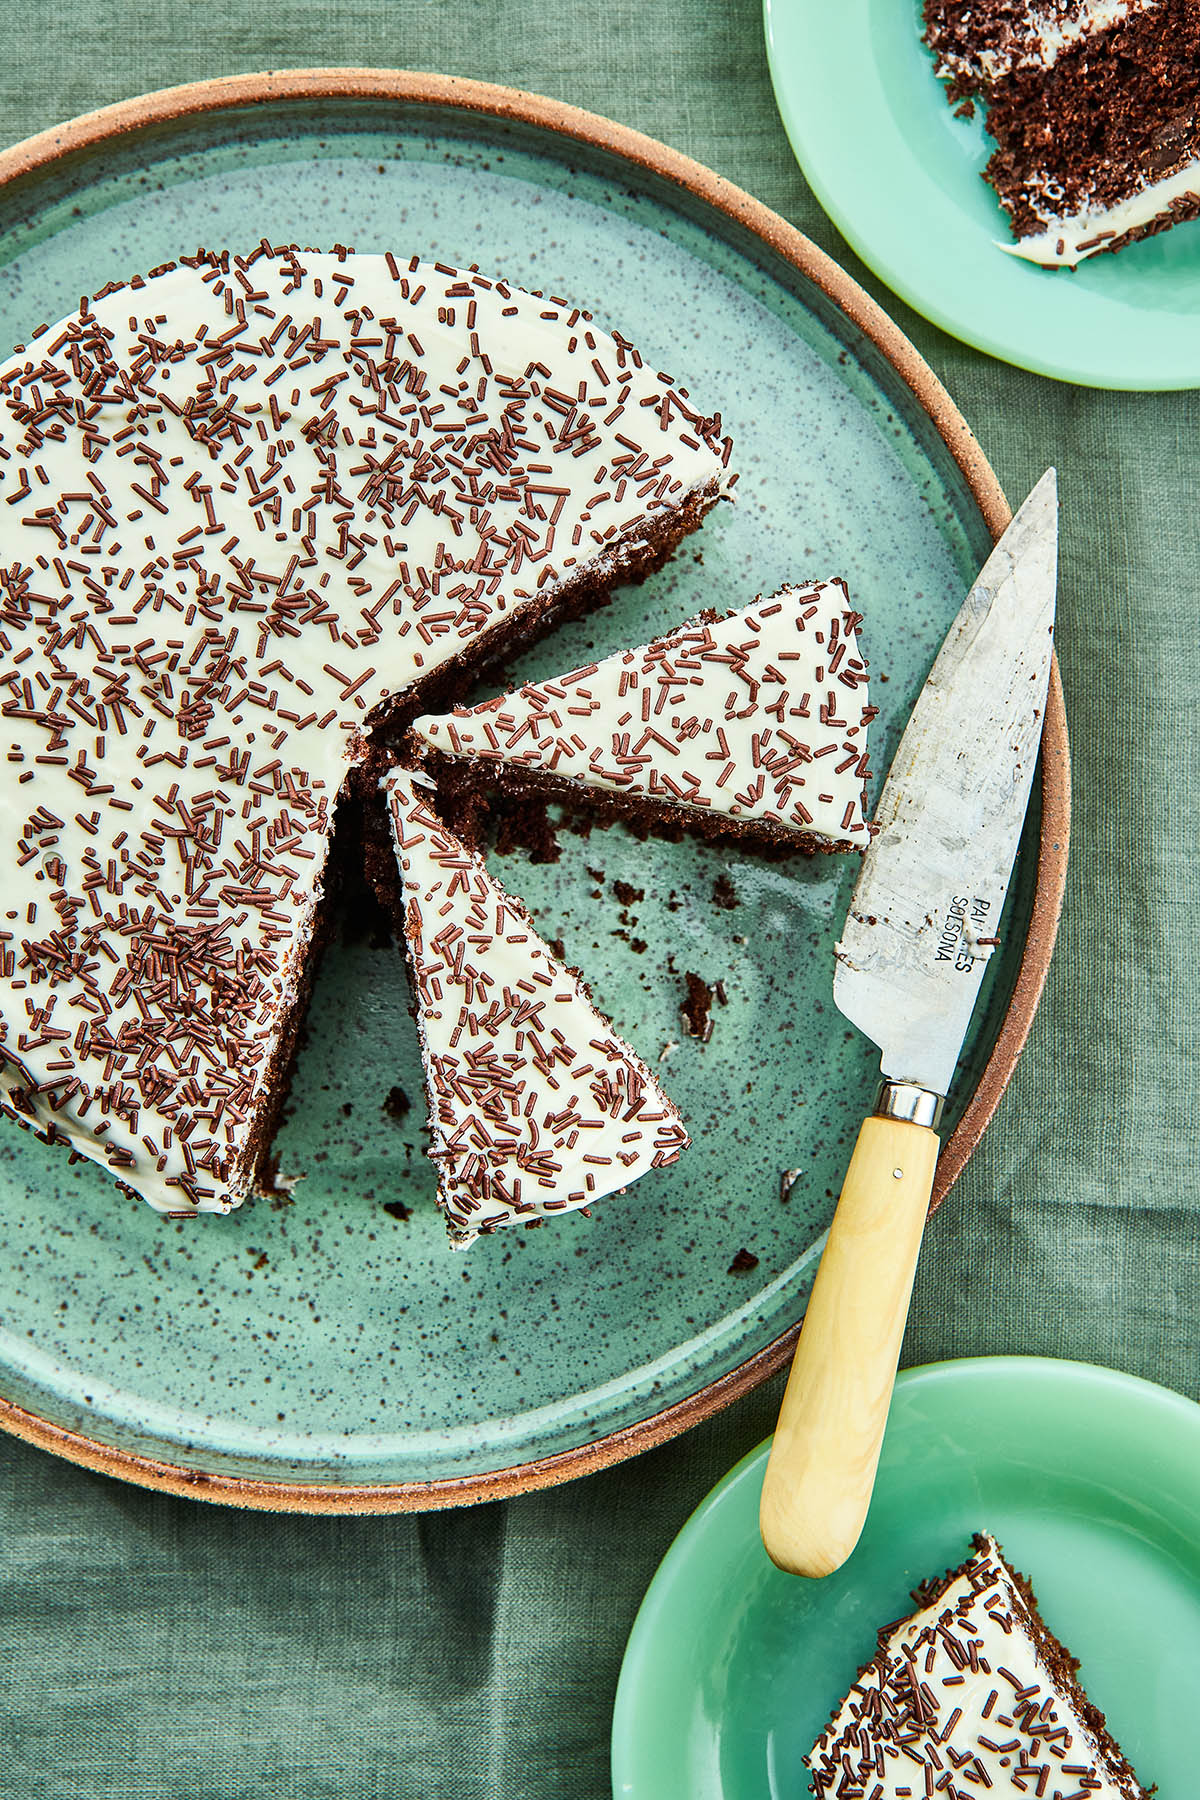 Overhead image of a sliced whole wheat chocolate cake on a green speckled pottery platter with slices of cake on small plates nearby.